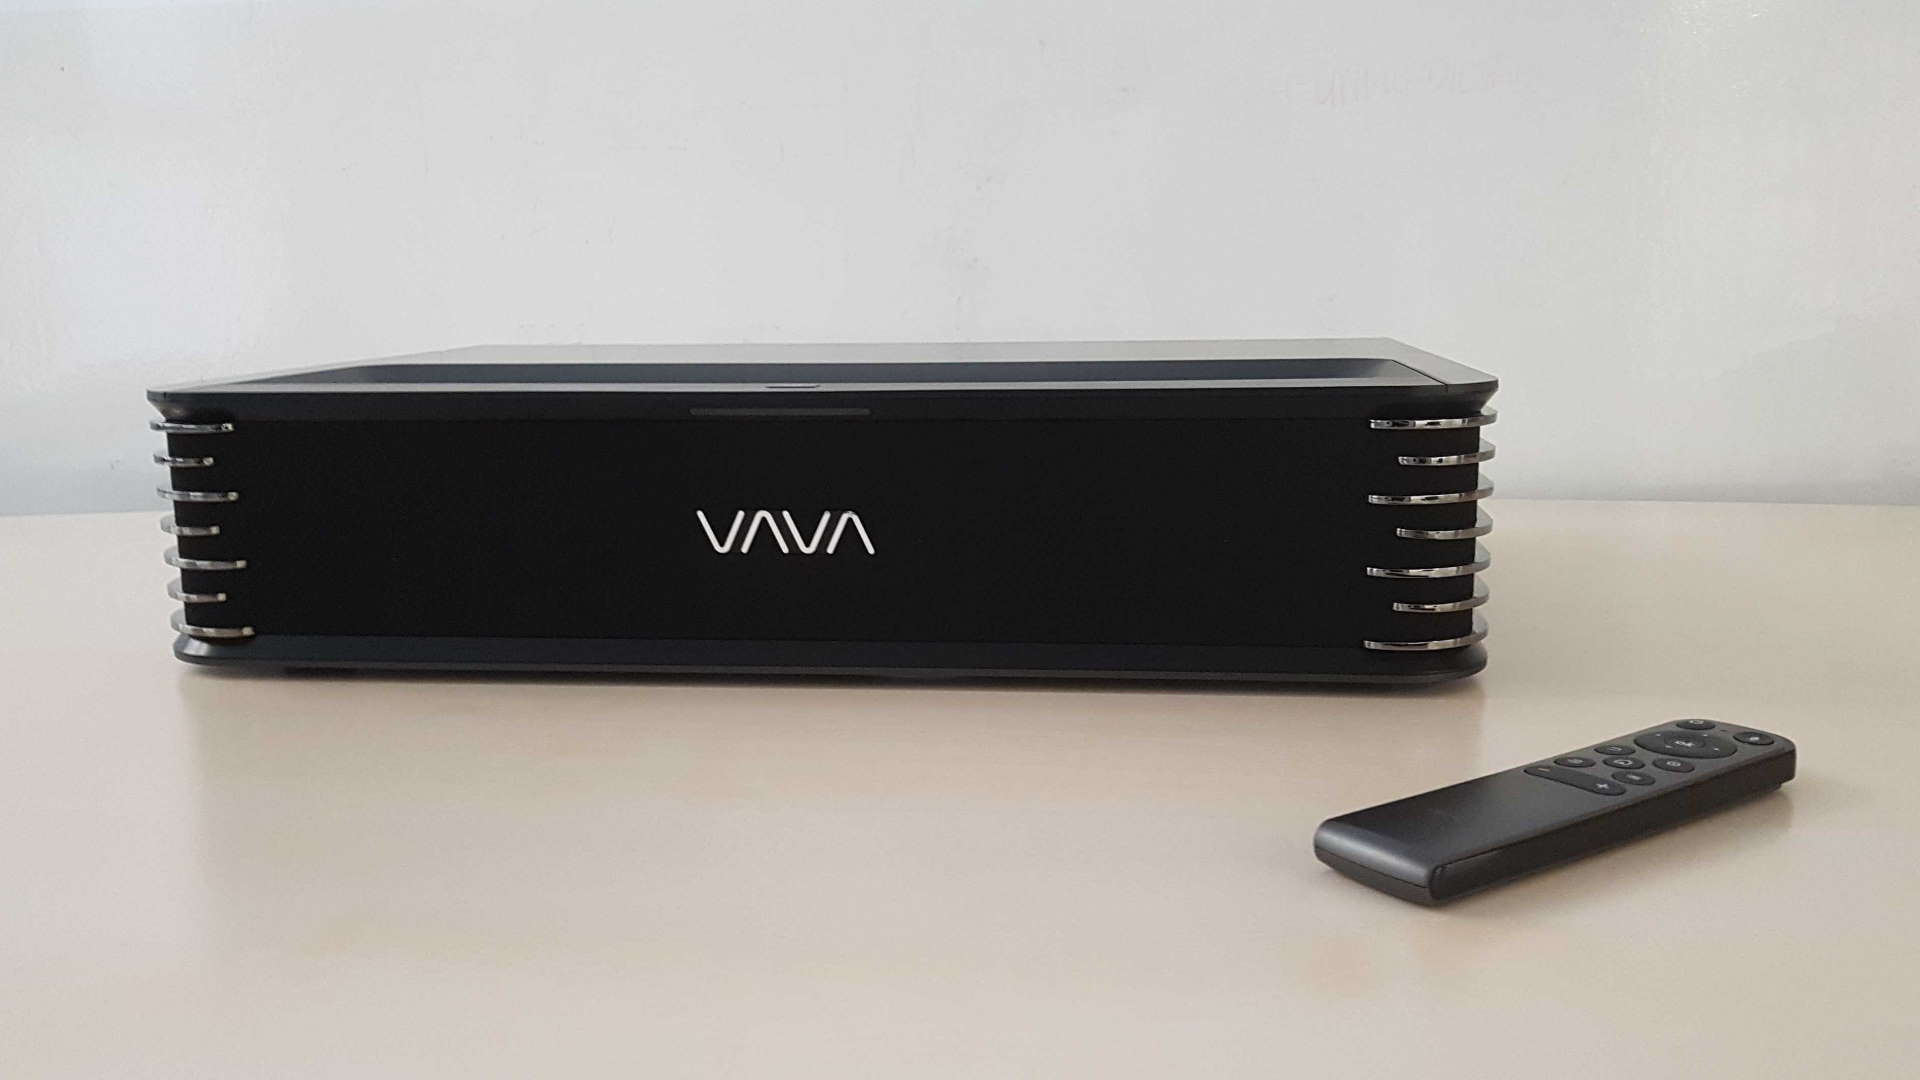 Vava chroma front view on table with remote